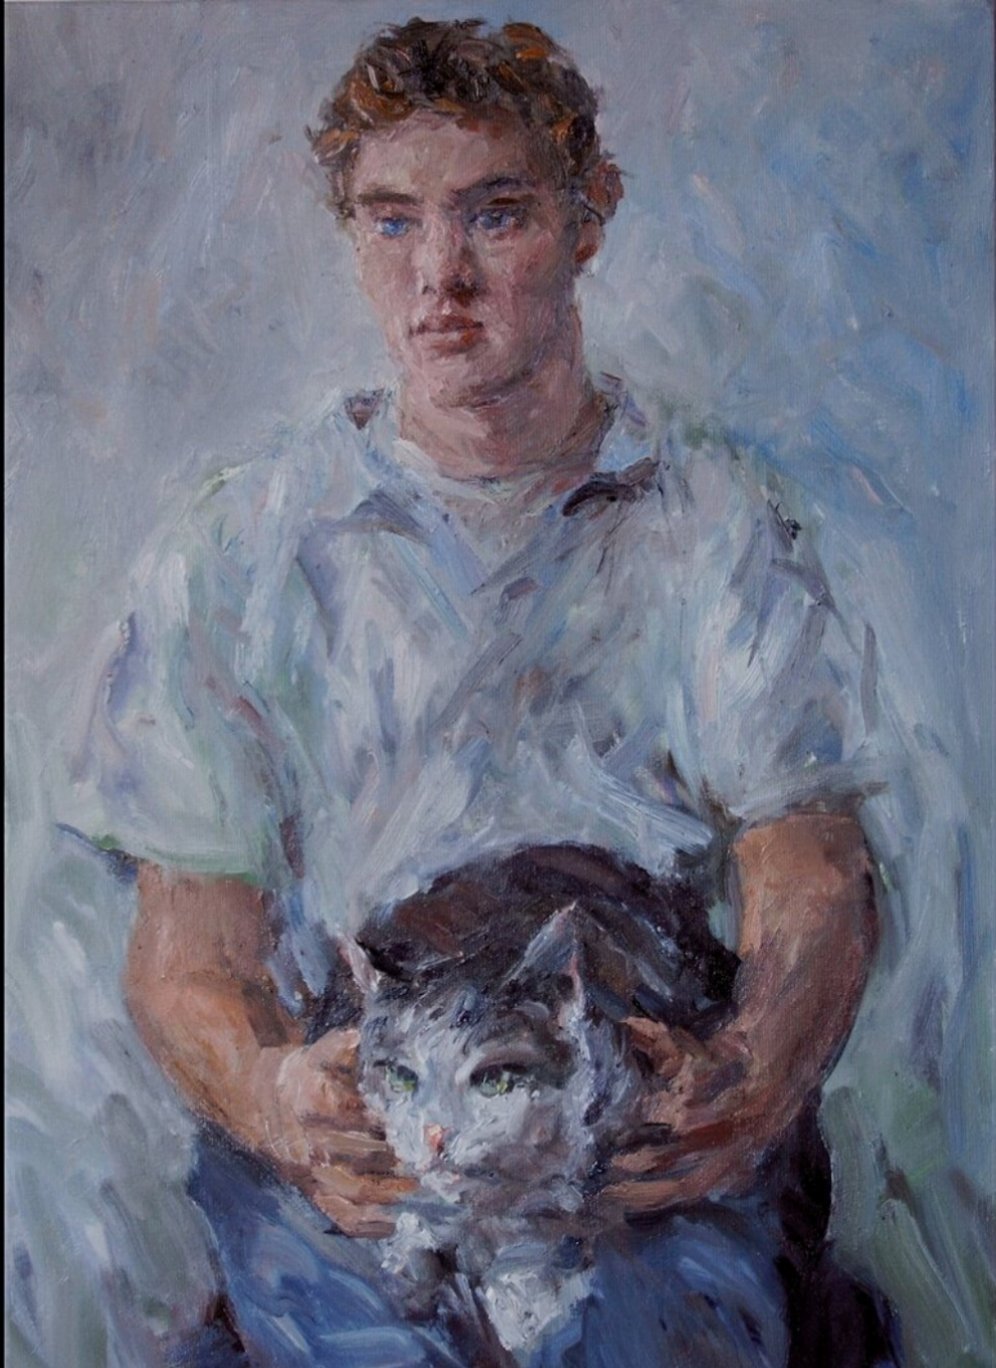 ‘Boy with a cat’ 2004 oil on linen 90x60cm